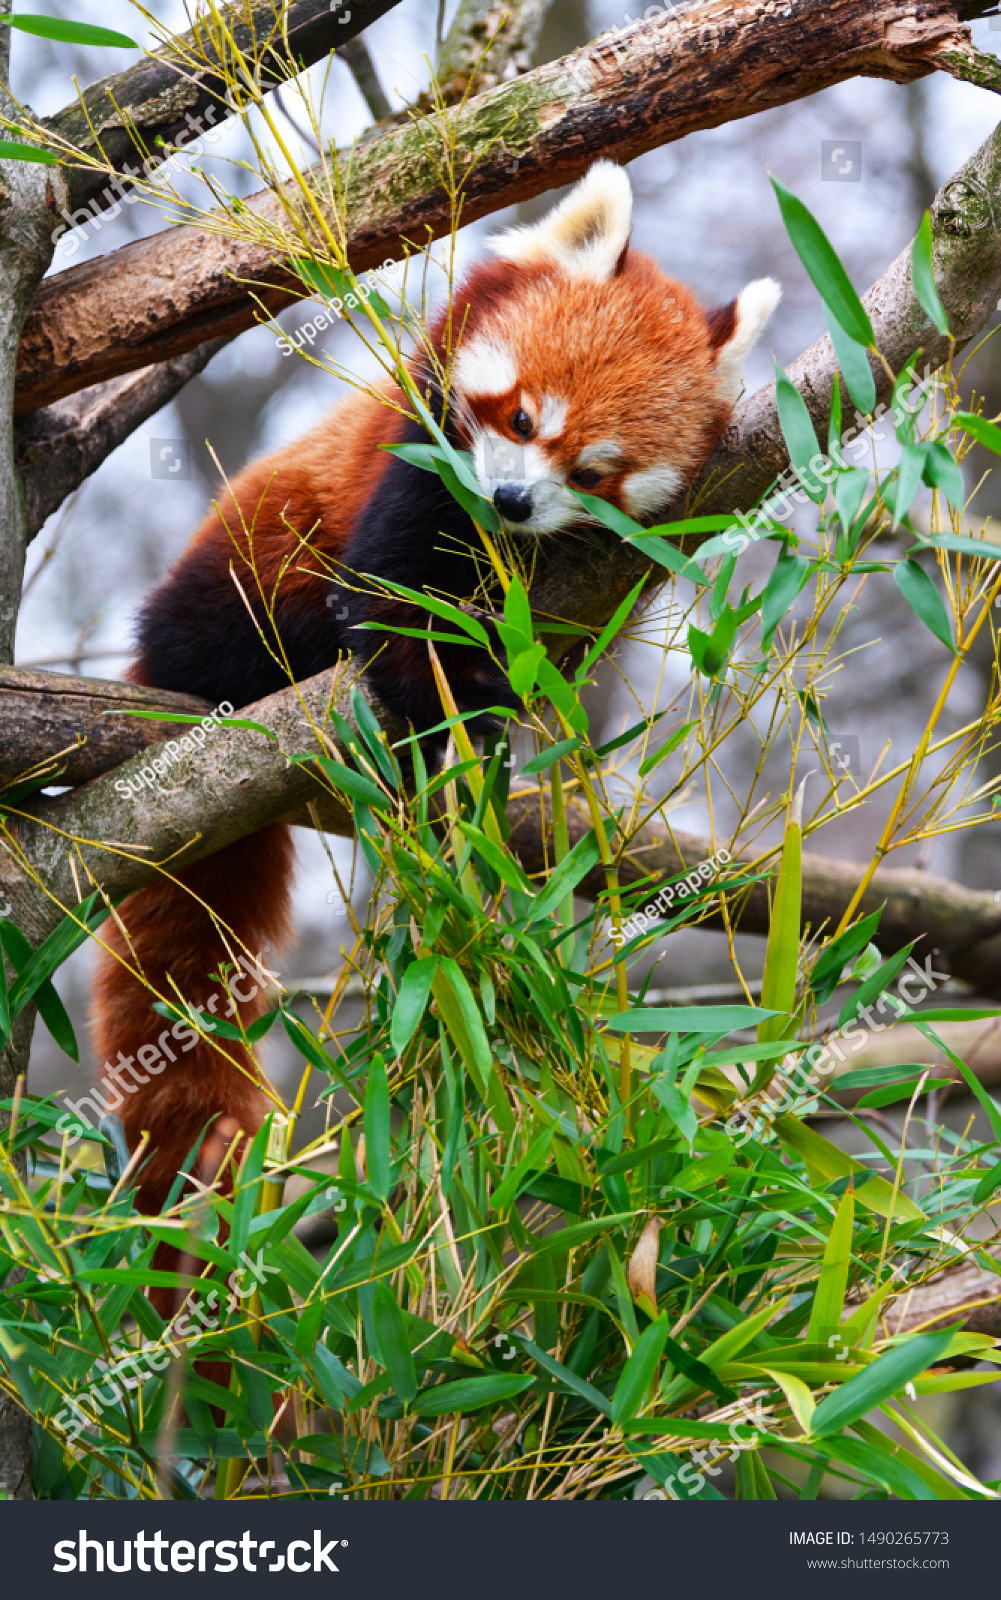 a red panda eats leaves of bamboo #1490265773